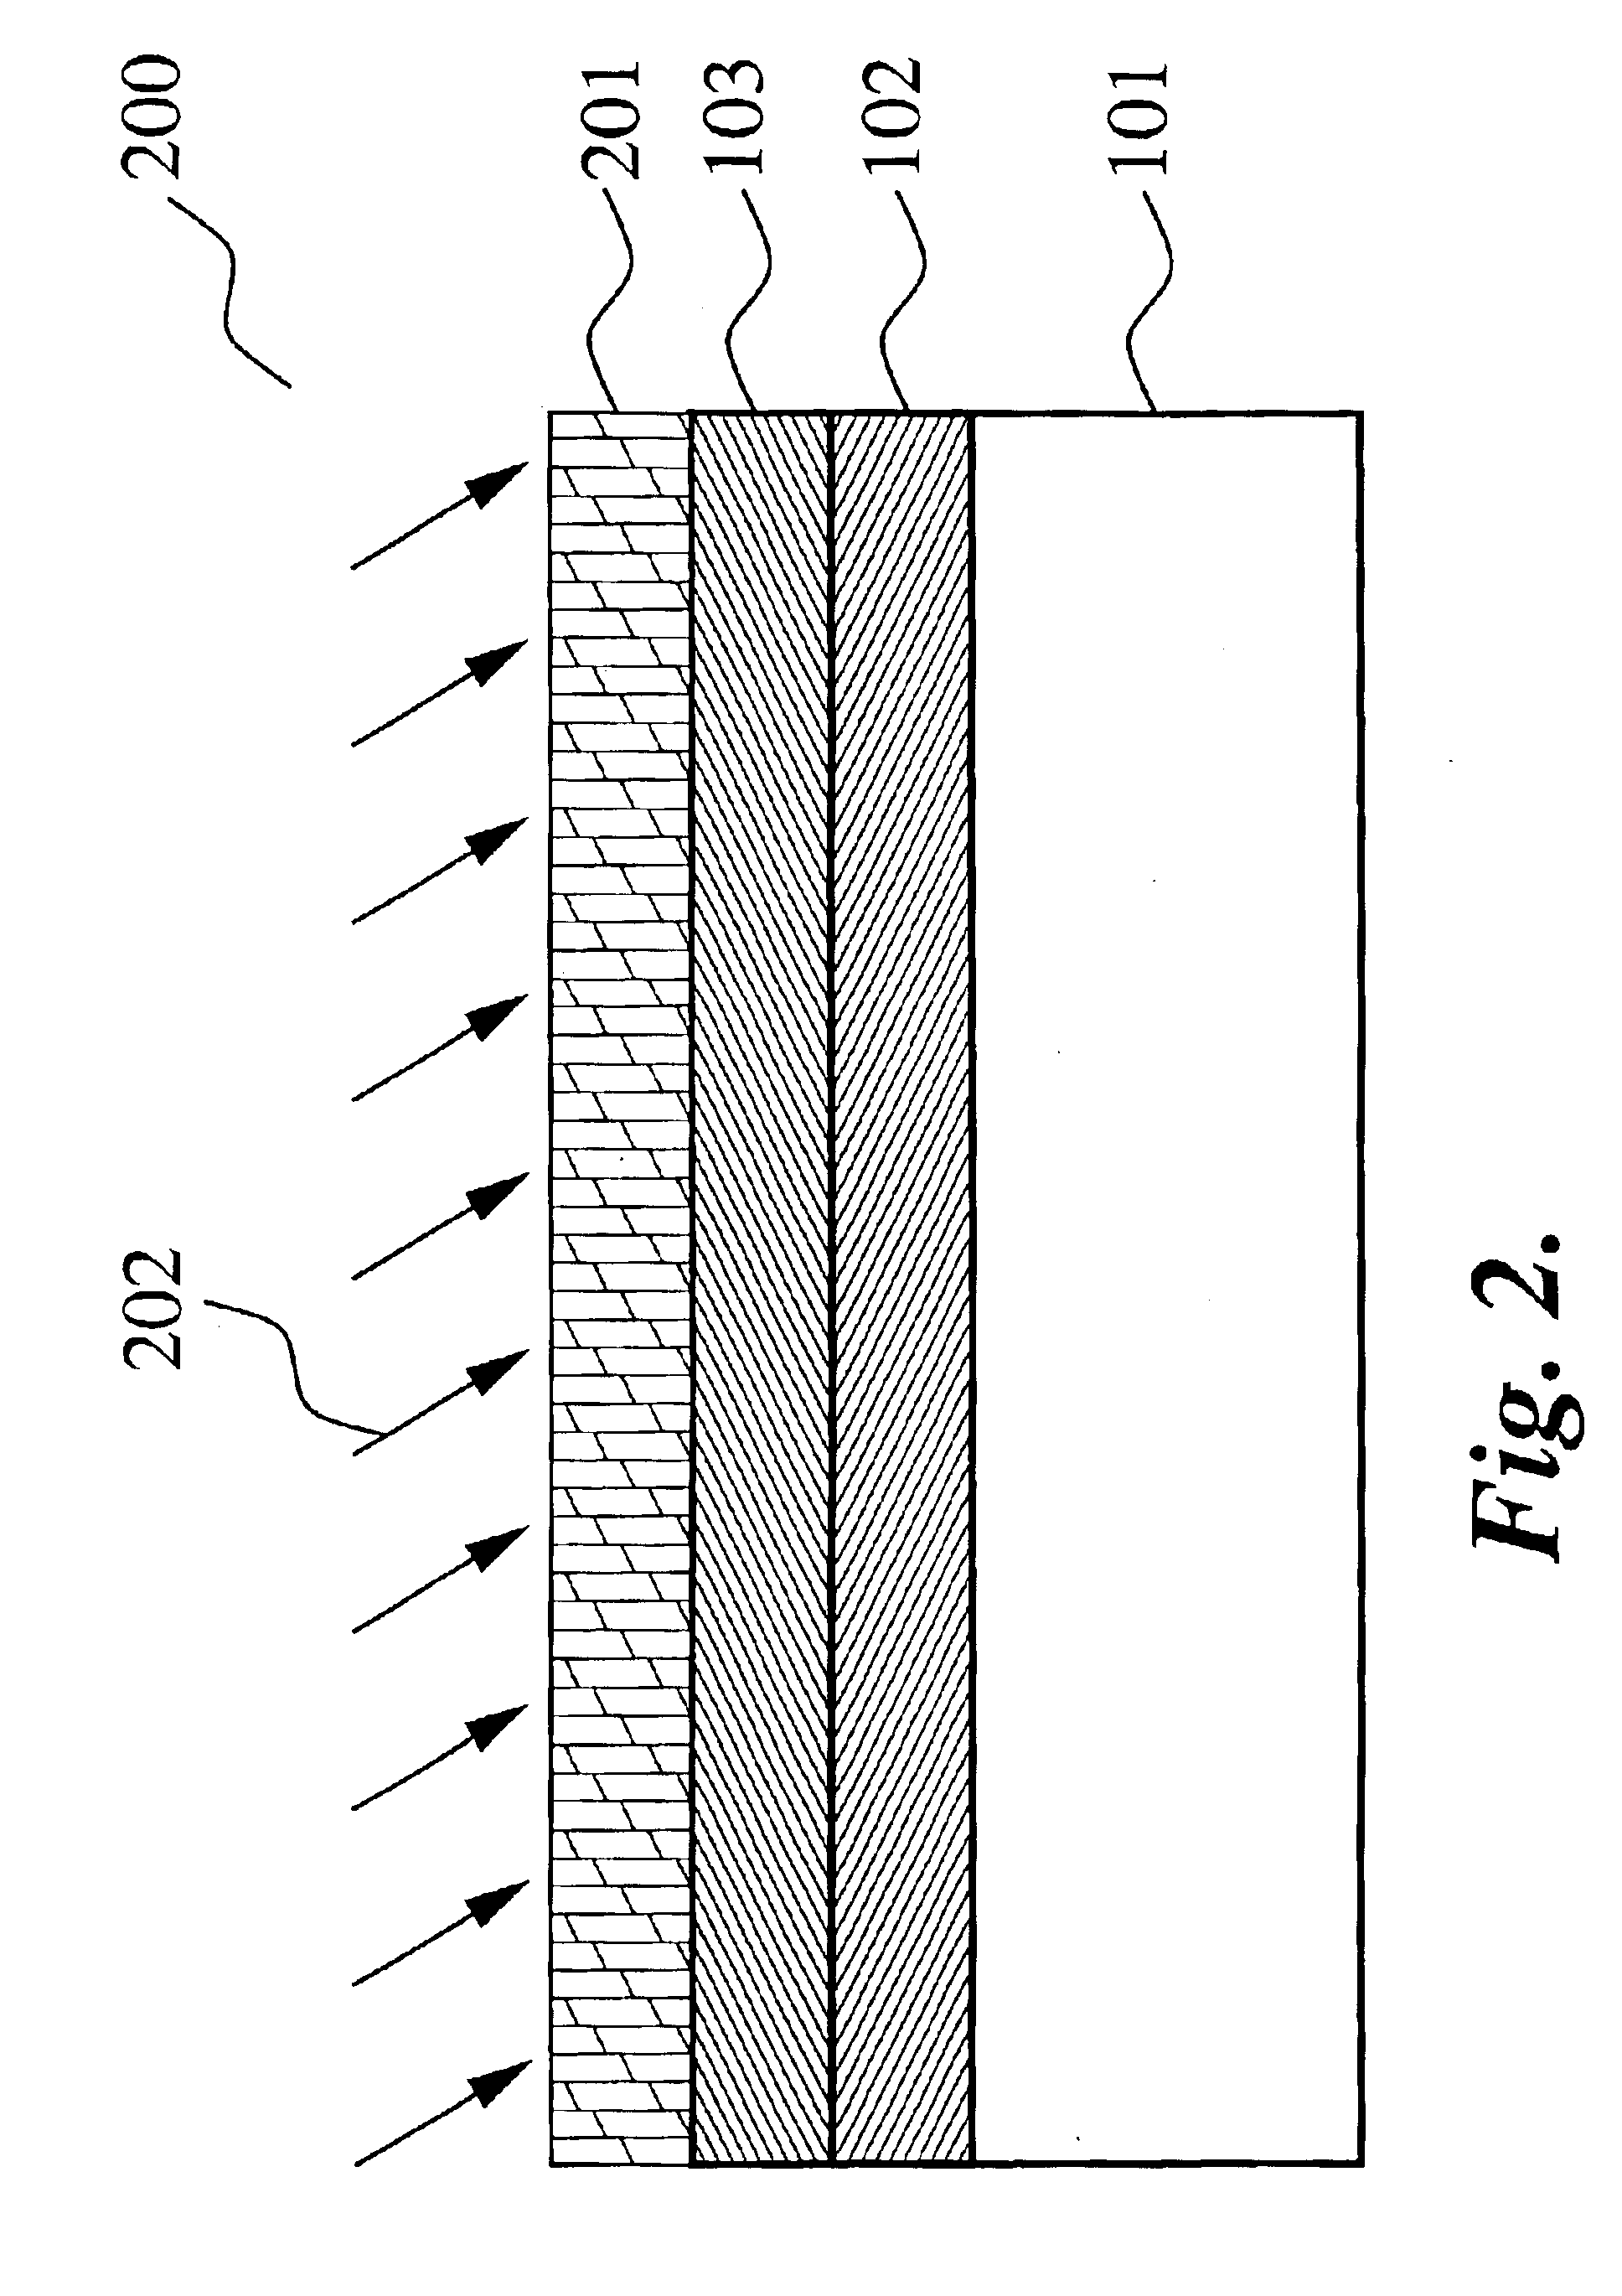 Method for forming carbon nanotubes with intermediate purification steps